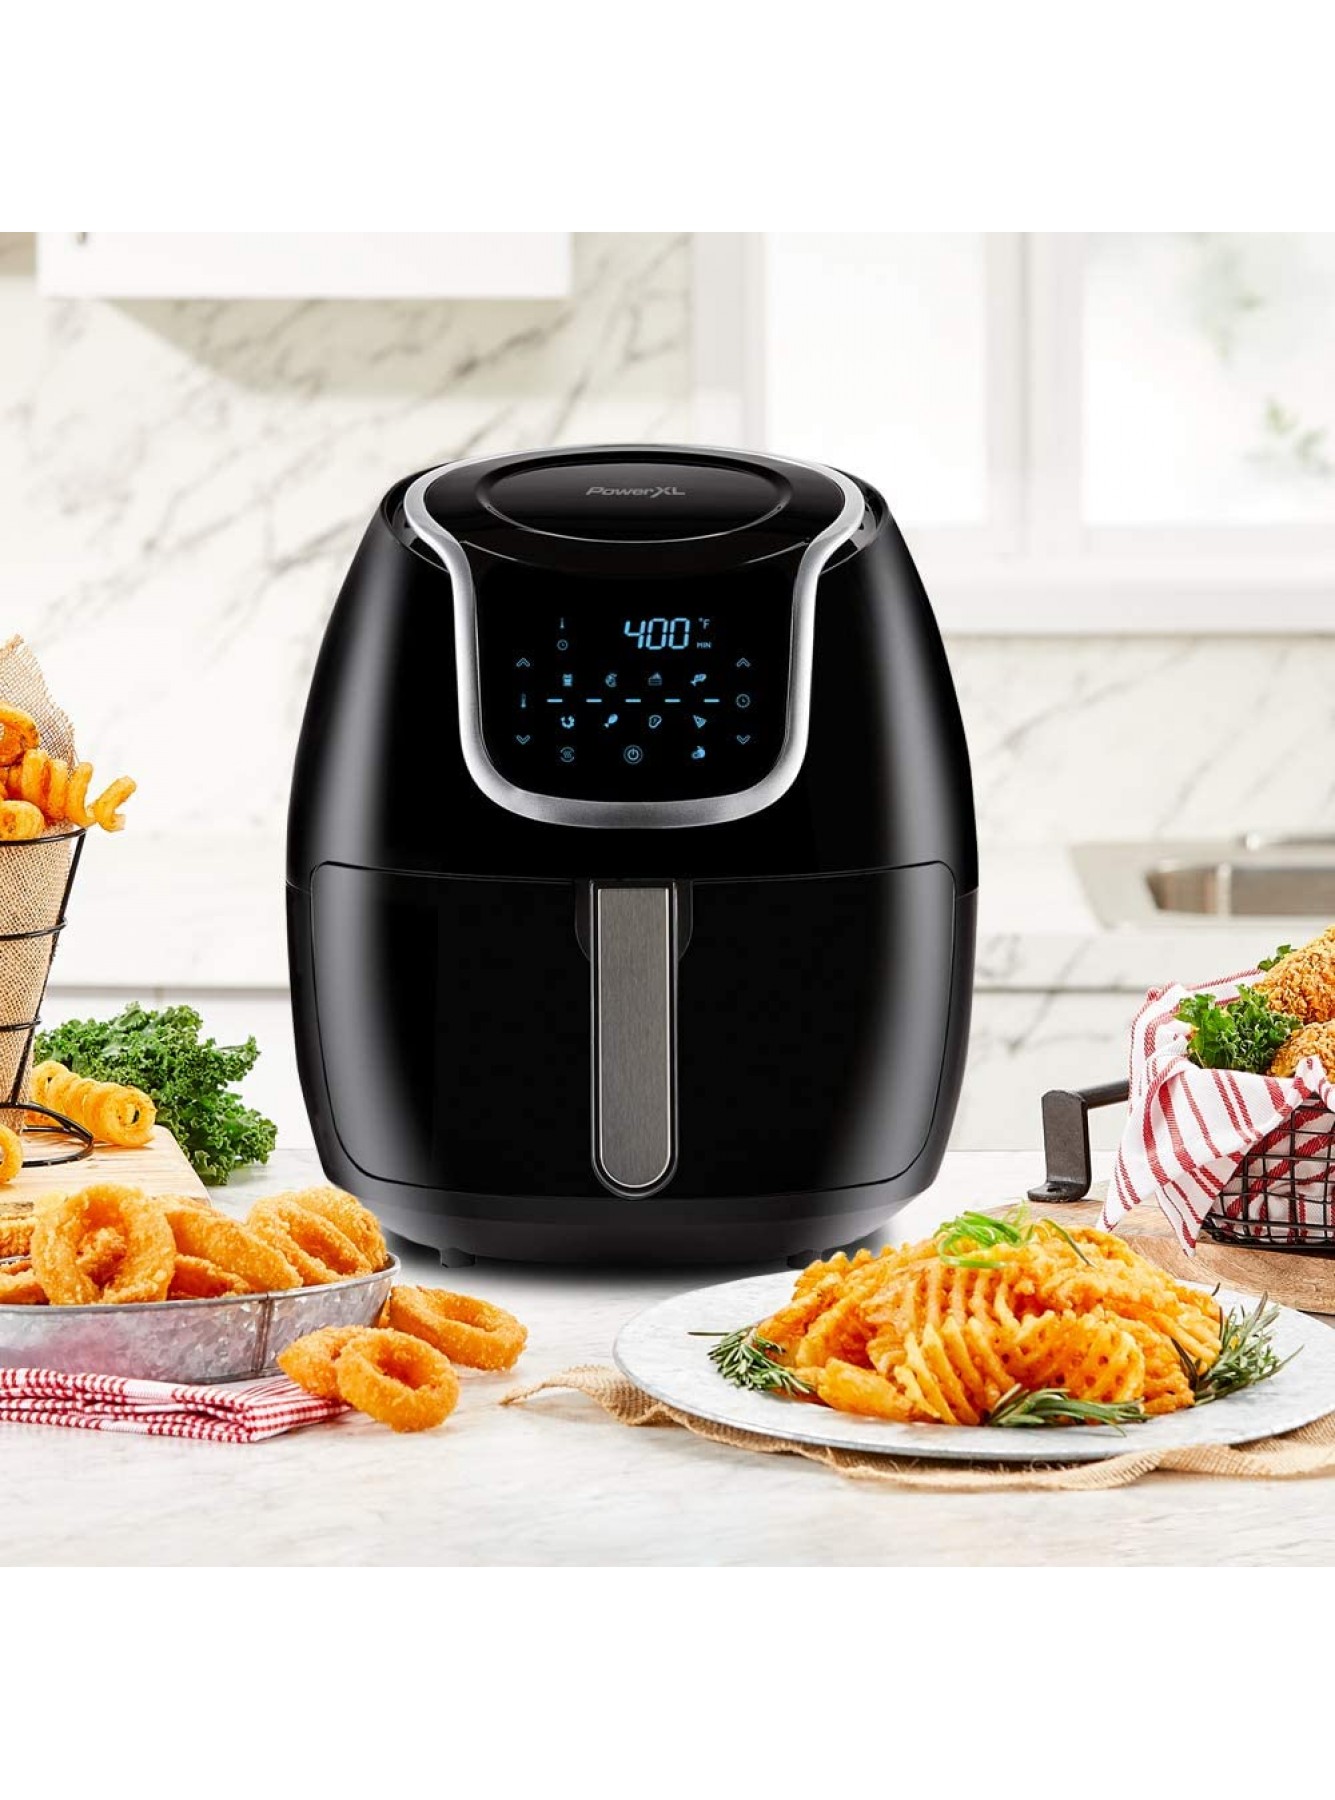 PowerXL Grill Air Fryer Combo 6 qt 12-in-1 Indoor Grill, Air Fryer, Slow Cooker, Roast, Bake, 1550-Watts, Stainless Steel Finish (Standard)